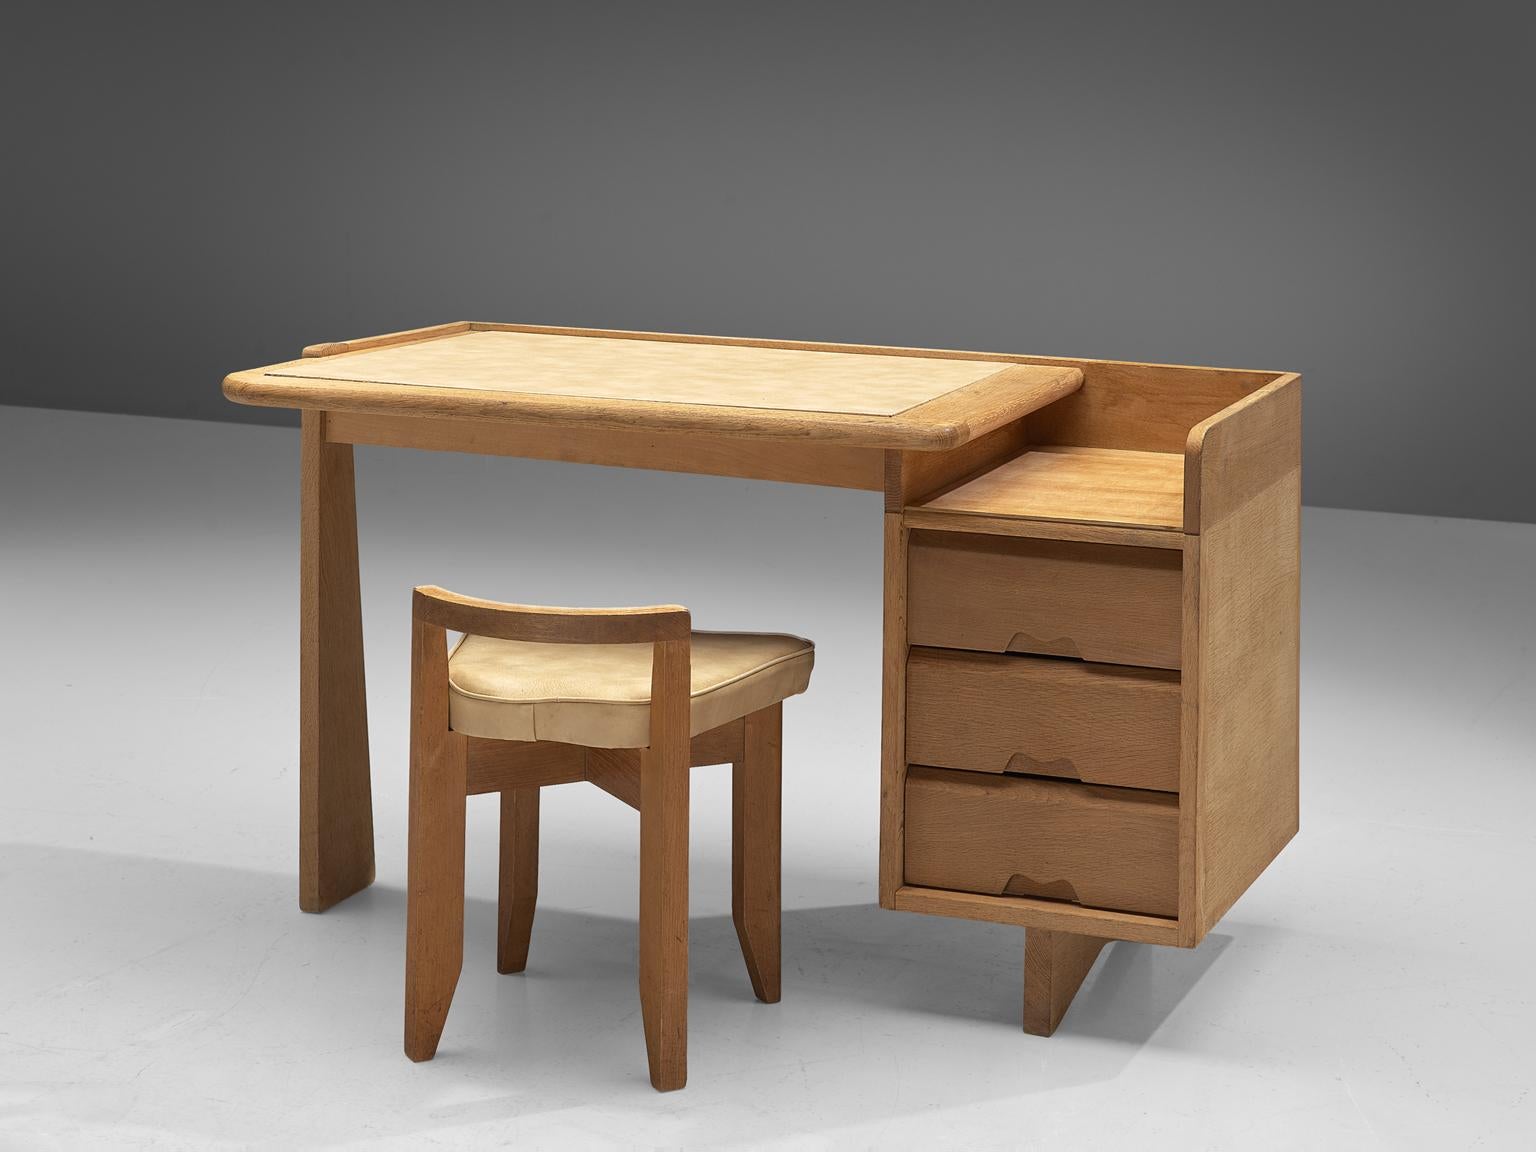 Guillerme et Chambron, desk, oak, fabric and leather, France, 1960s. 

These small desk and stool are designed by the French designer duo Guillerme and Chambron. The writing desk holds the characteristic decorations and lines of this duo such as the